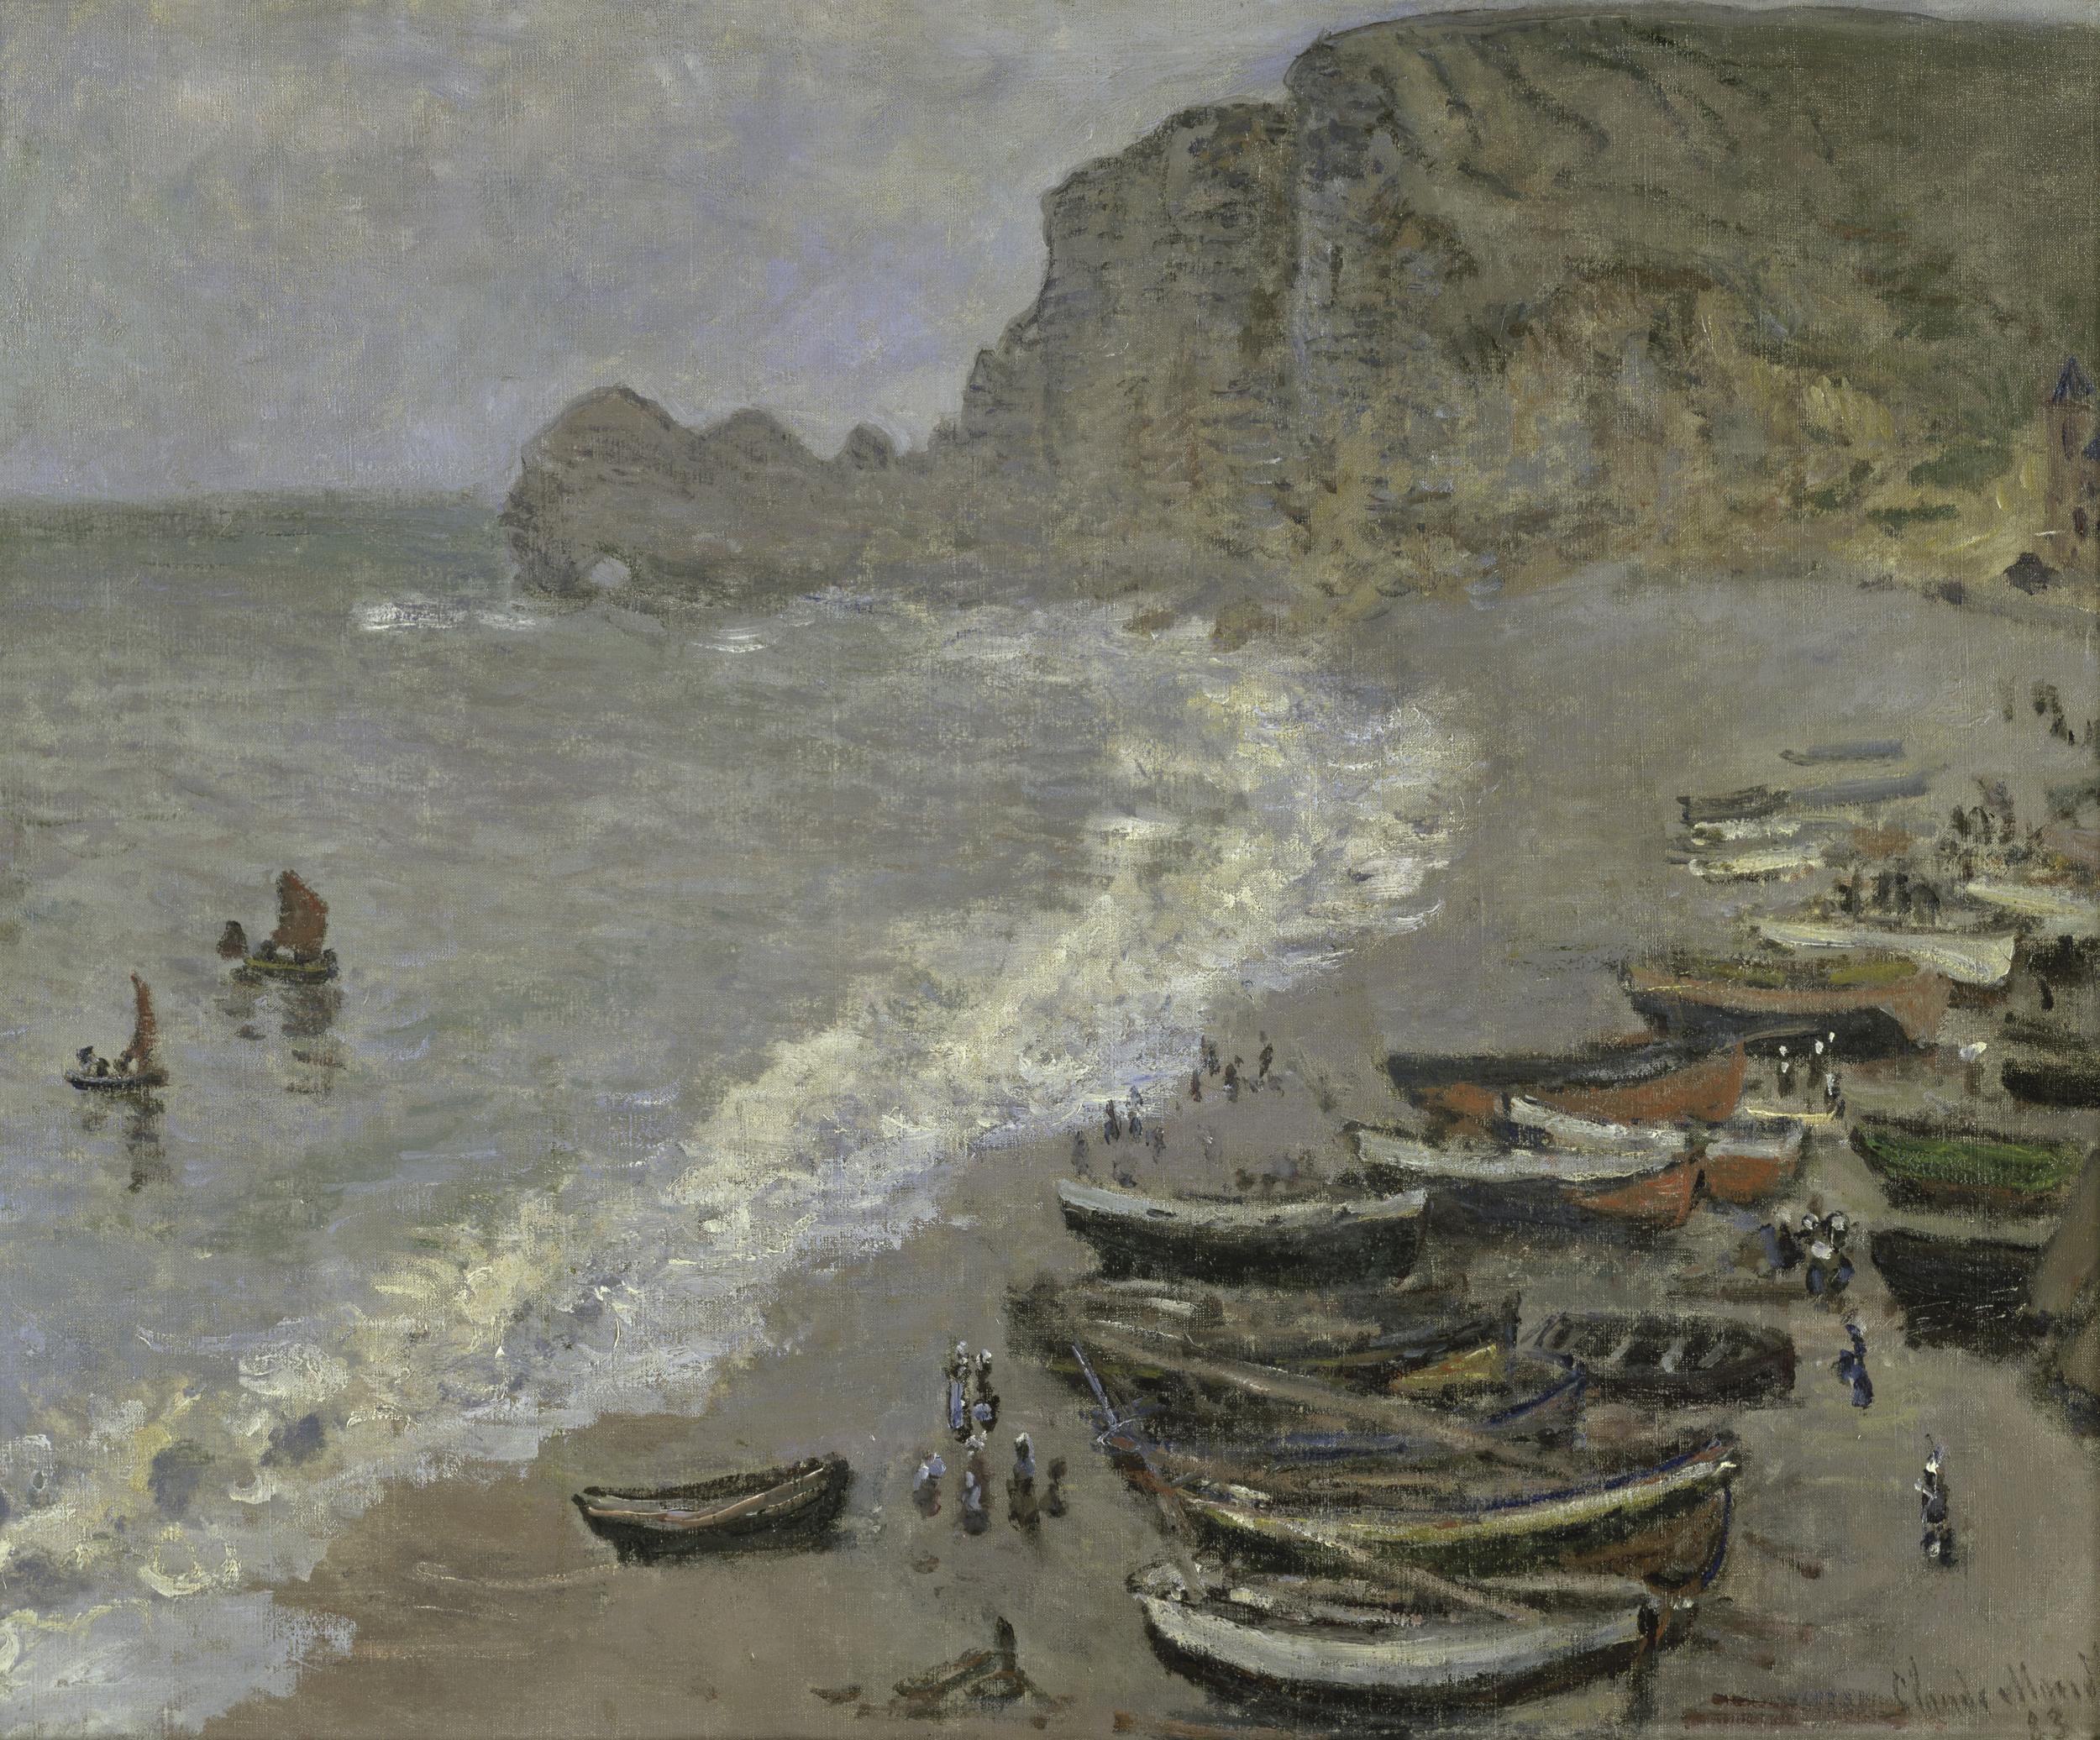 Monet immortalised the landscape in his pastel pictures